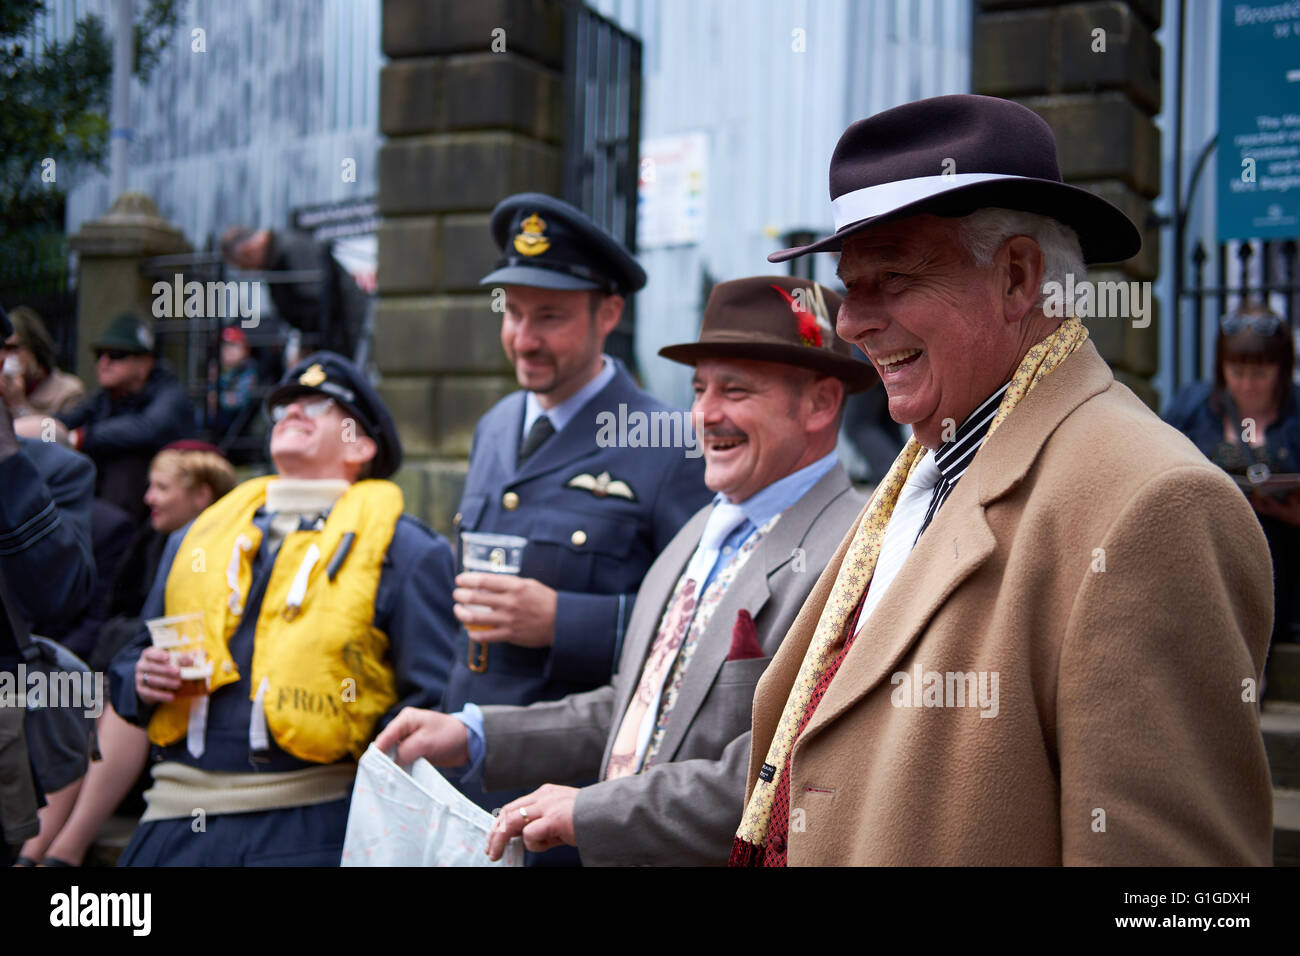 Four men, two in RAF uniform and two dressed in 1940s vintage clothing, at a reenactment event. Stock Photo